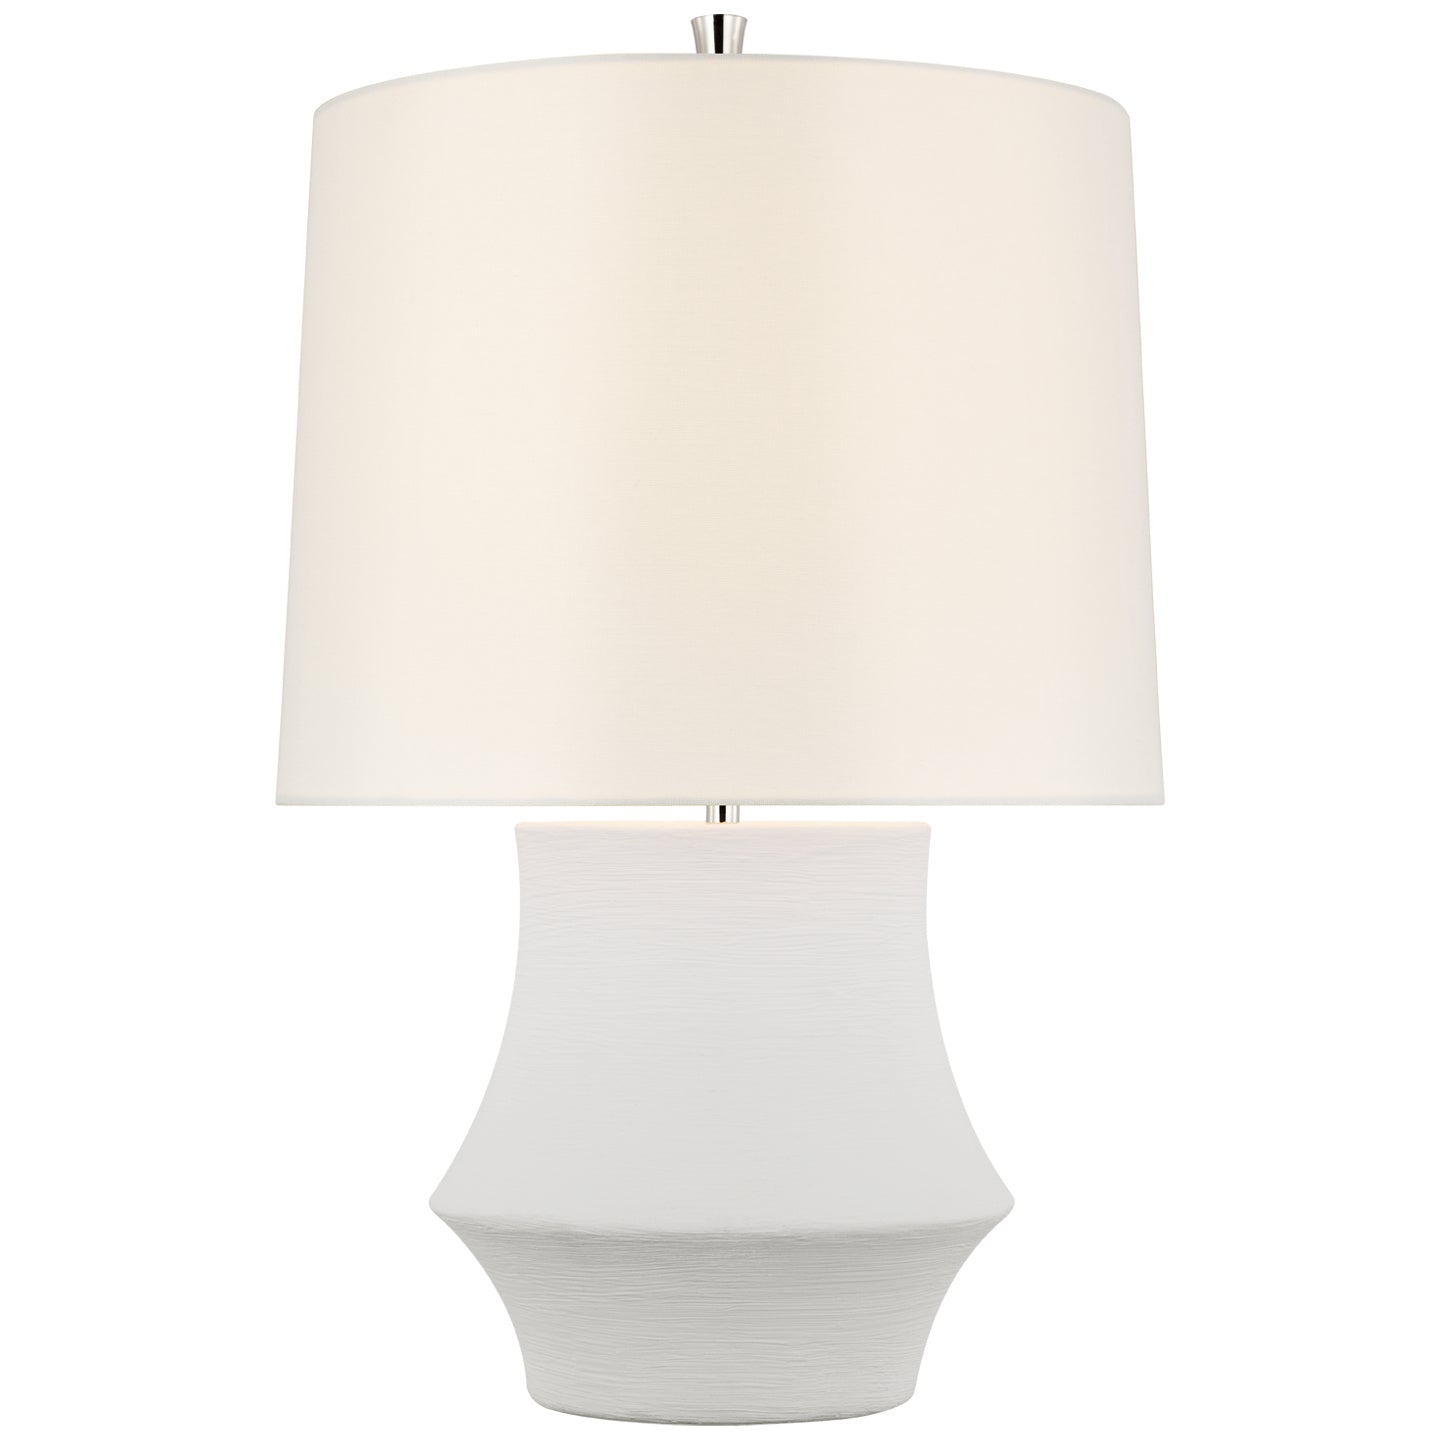 Load image into Gallery viewer, Visual Comfort Signature - ARN 3321PW-L - LED Table Lamp - Lakmos - Plaster White
